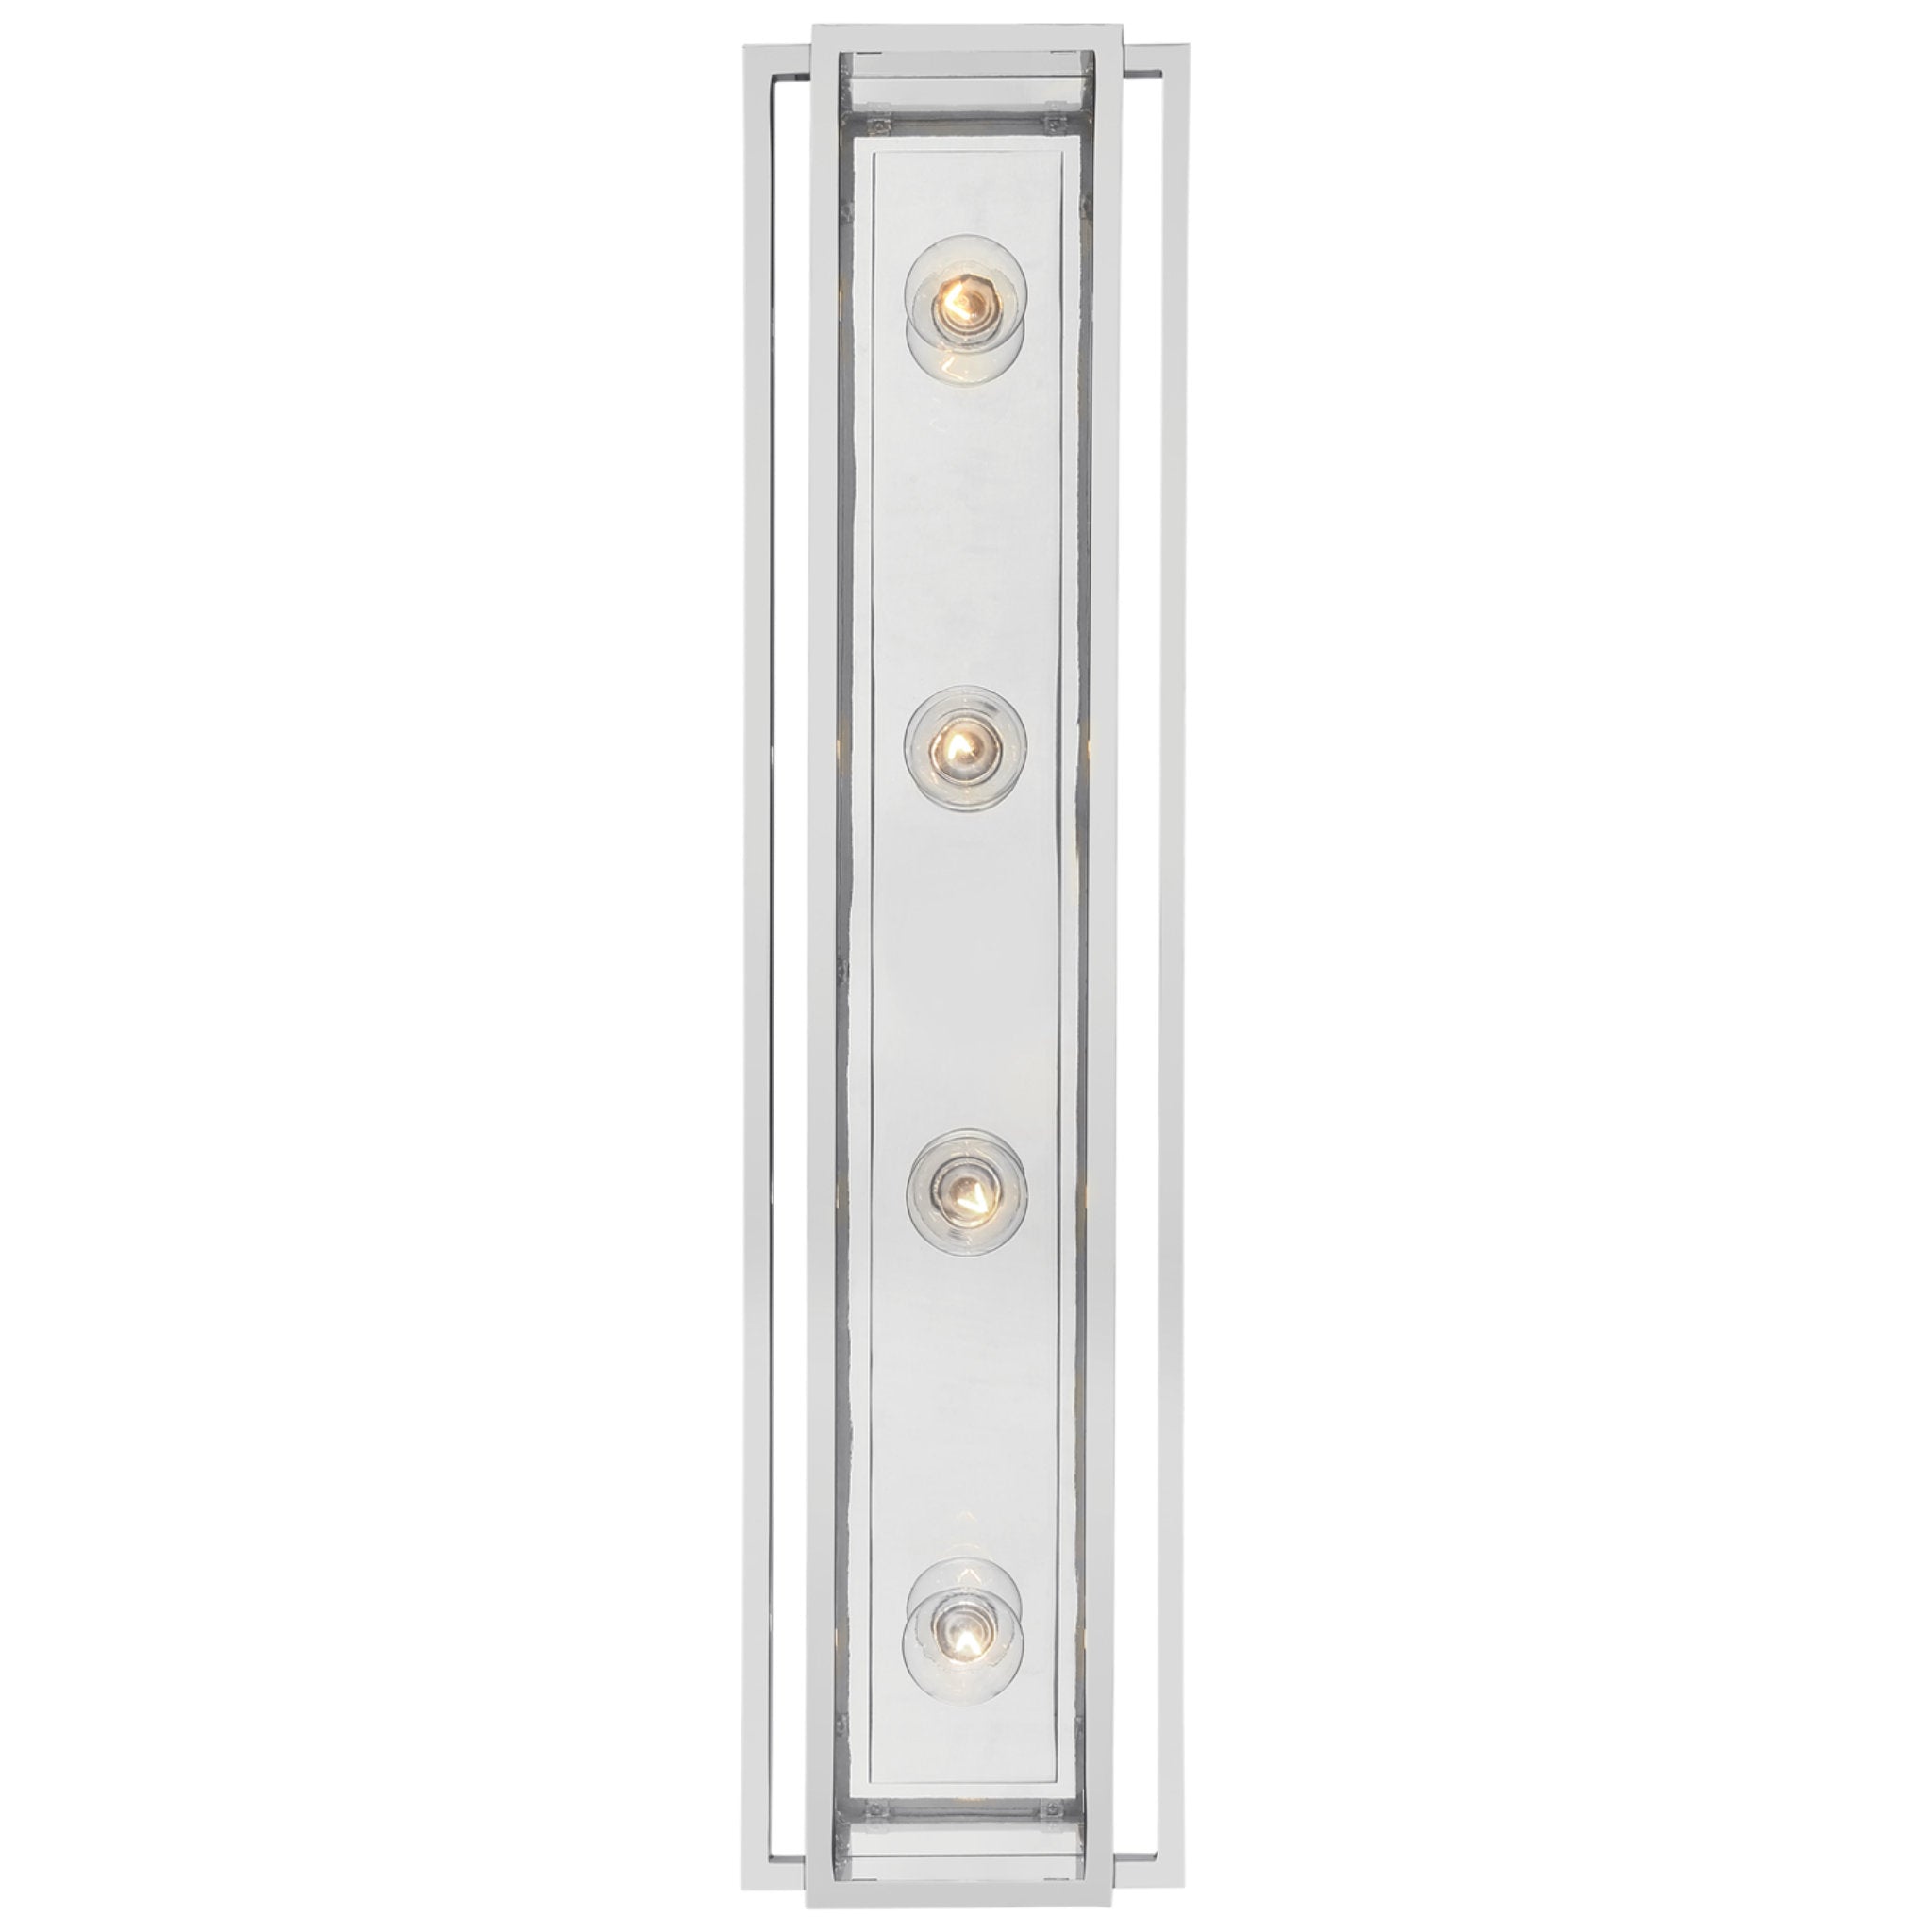 Ian K. Fowler Halle 30" Vanity Light in Polished Nickel with Clear Glass